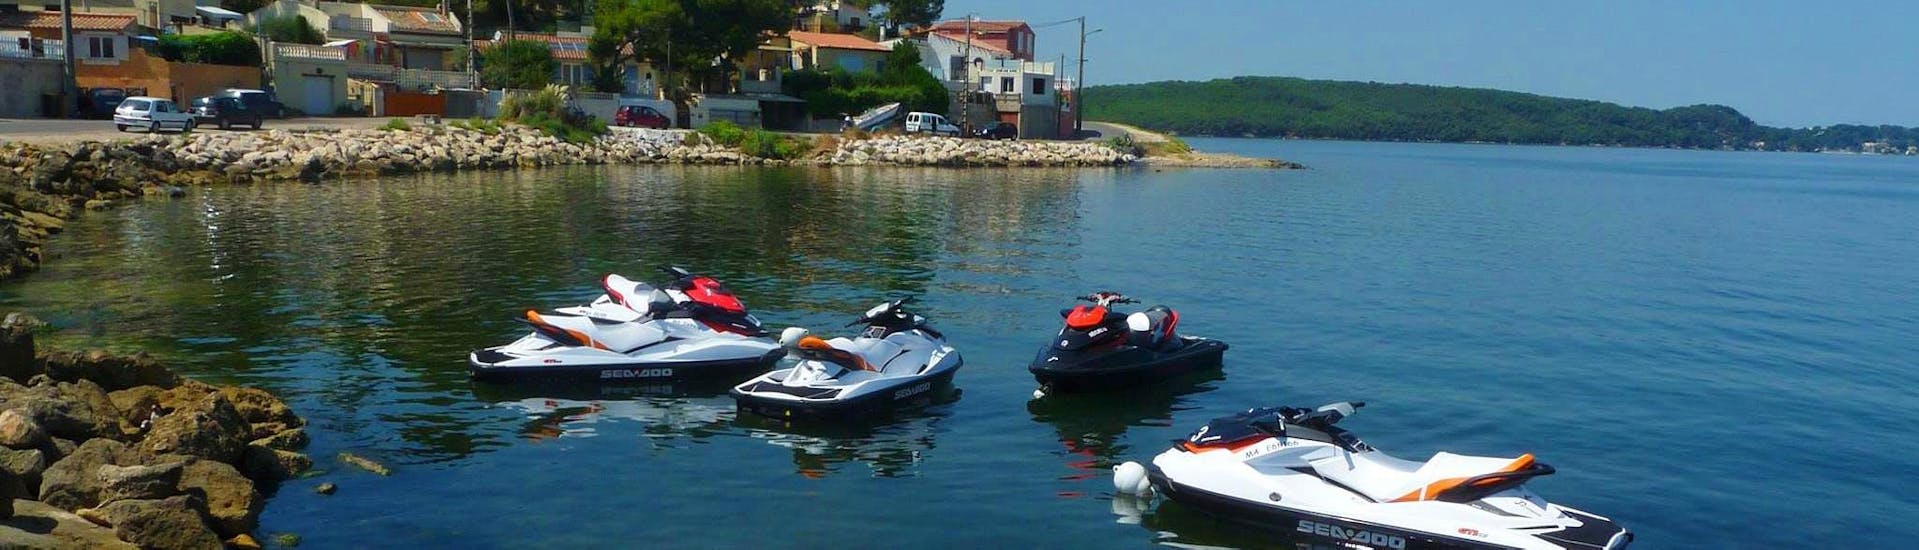 Tourists are admiring the panorama from the coast on the Etang de Berre during the initiation avec Jet Ski Aventure in Martigues.